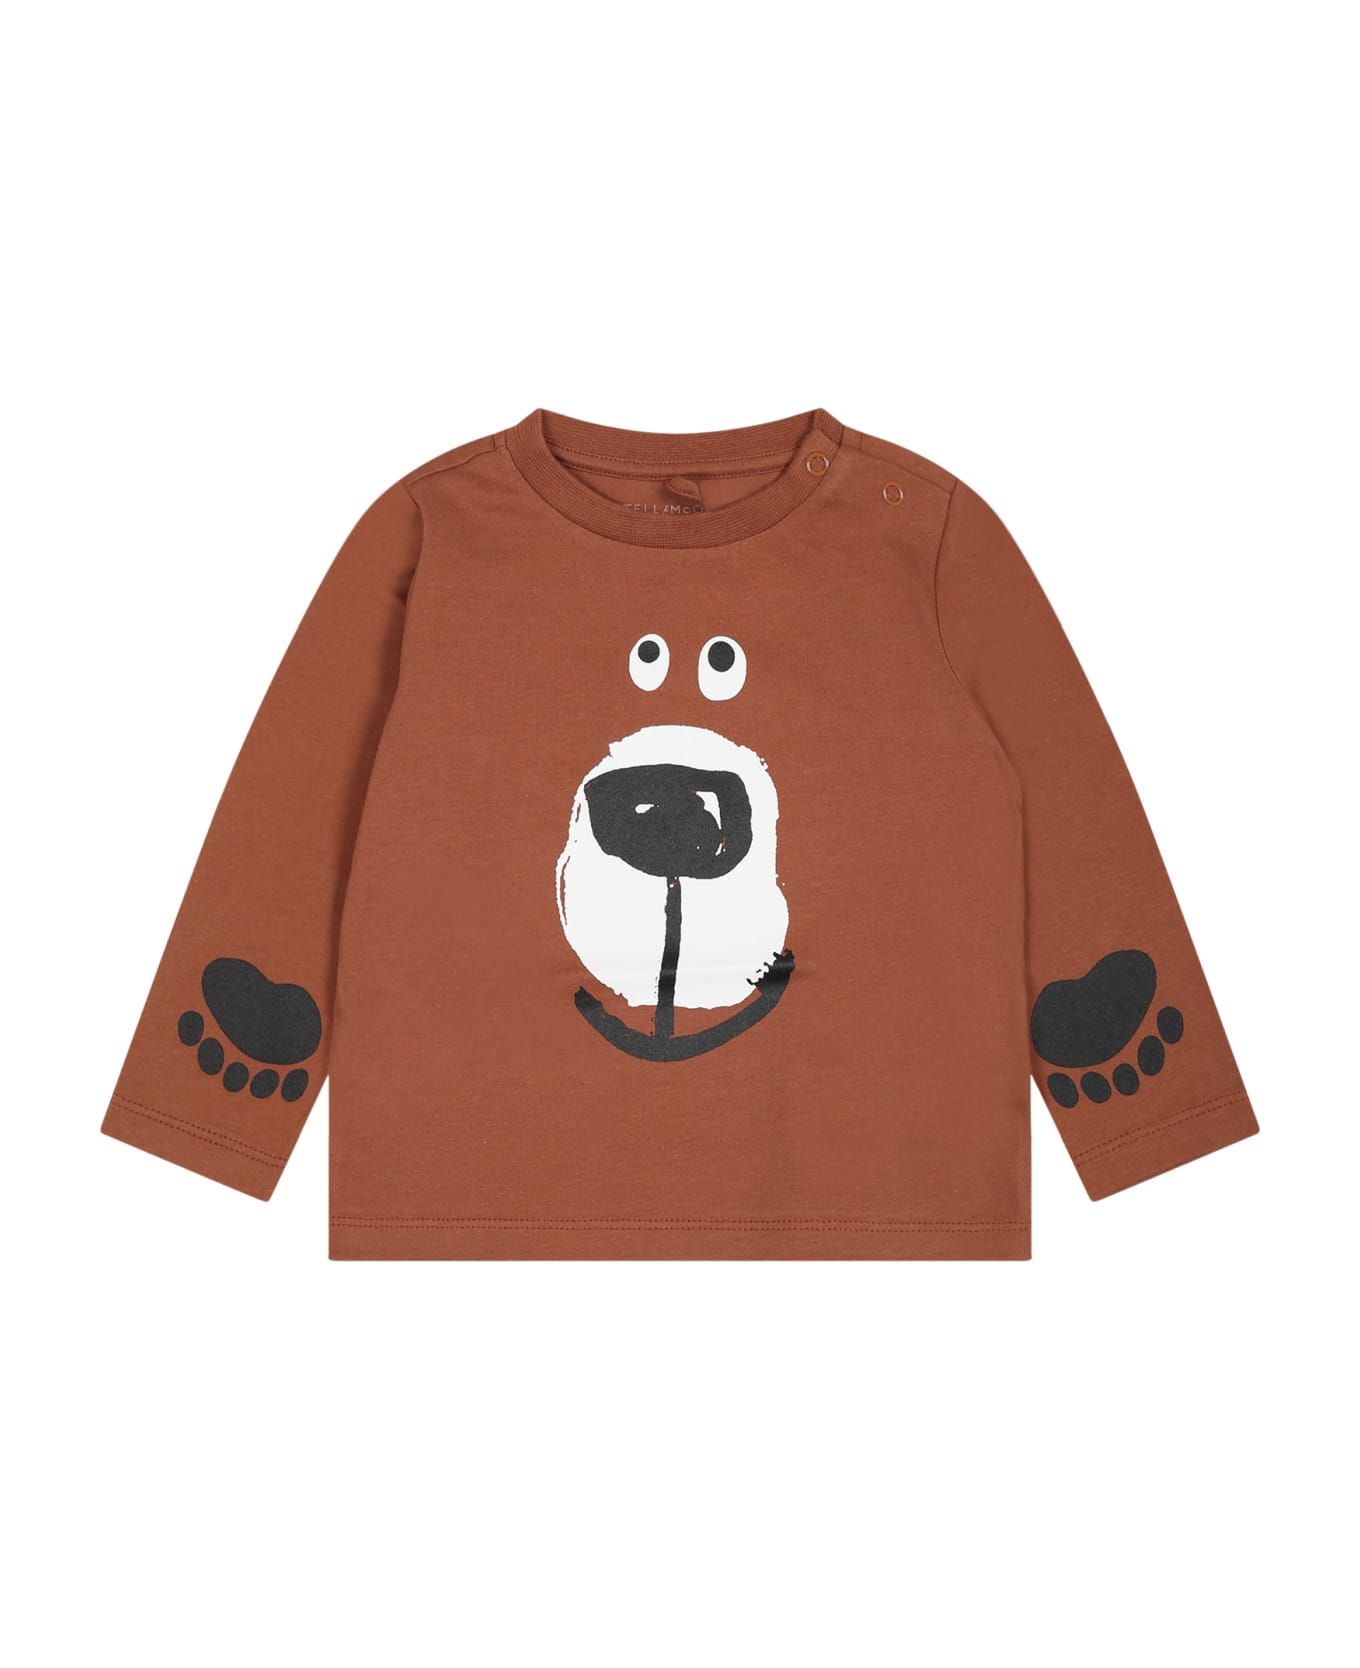 Stella McCartney Kids Brown T-shirt For Baby Boy With Print - Brown